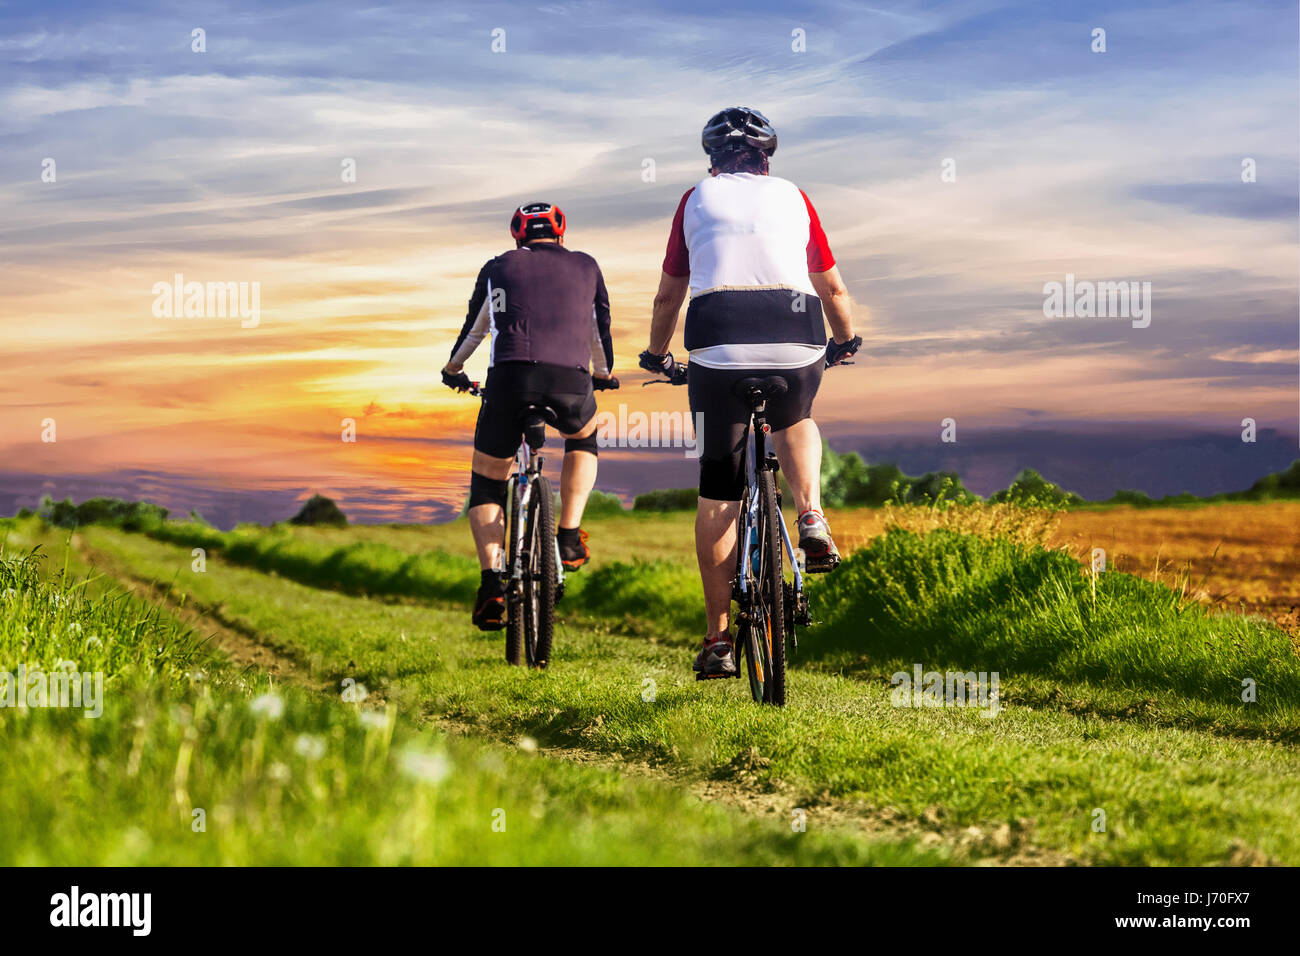 The couple ride a bike on the field road scenery Rear-view, sunset, Two people cycling on rural road, countryside, healthy lifestyle  Czech Republic Stock Photo